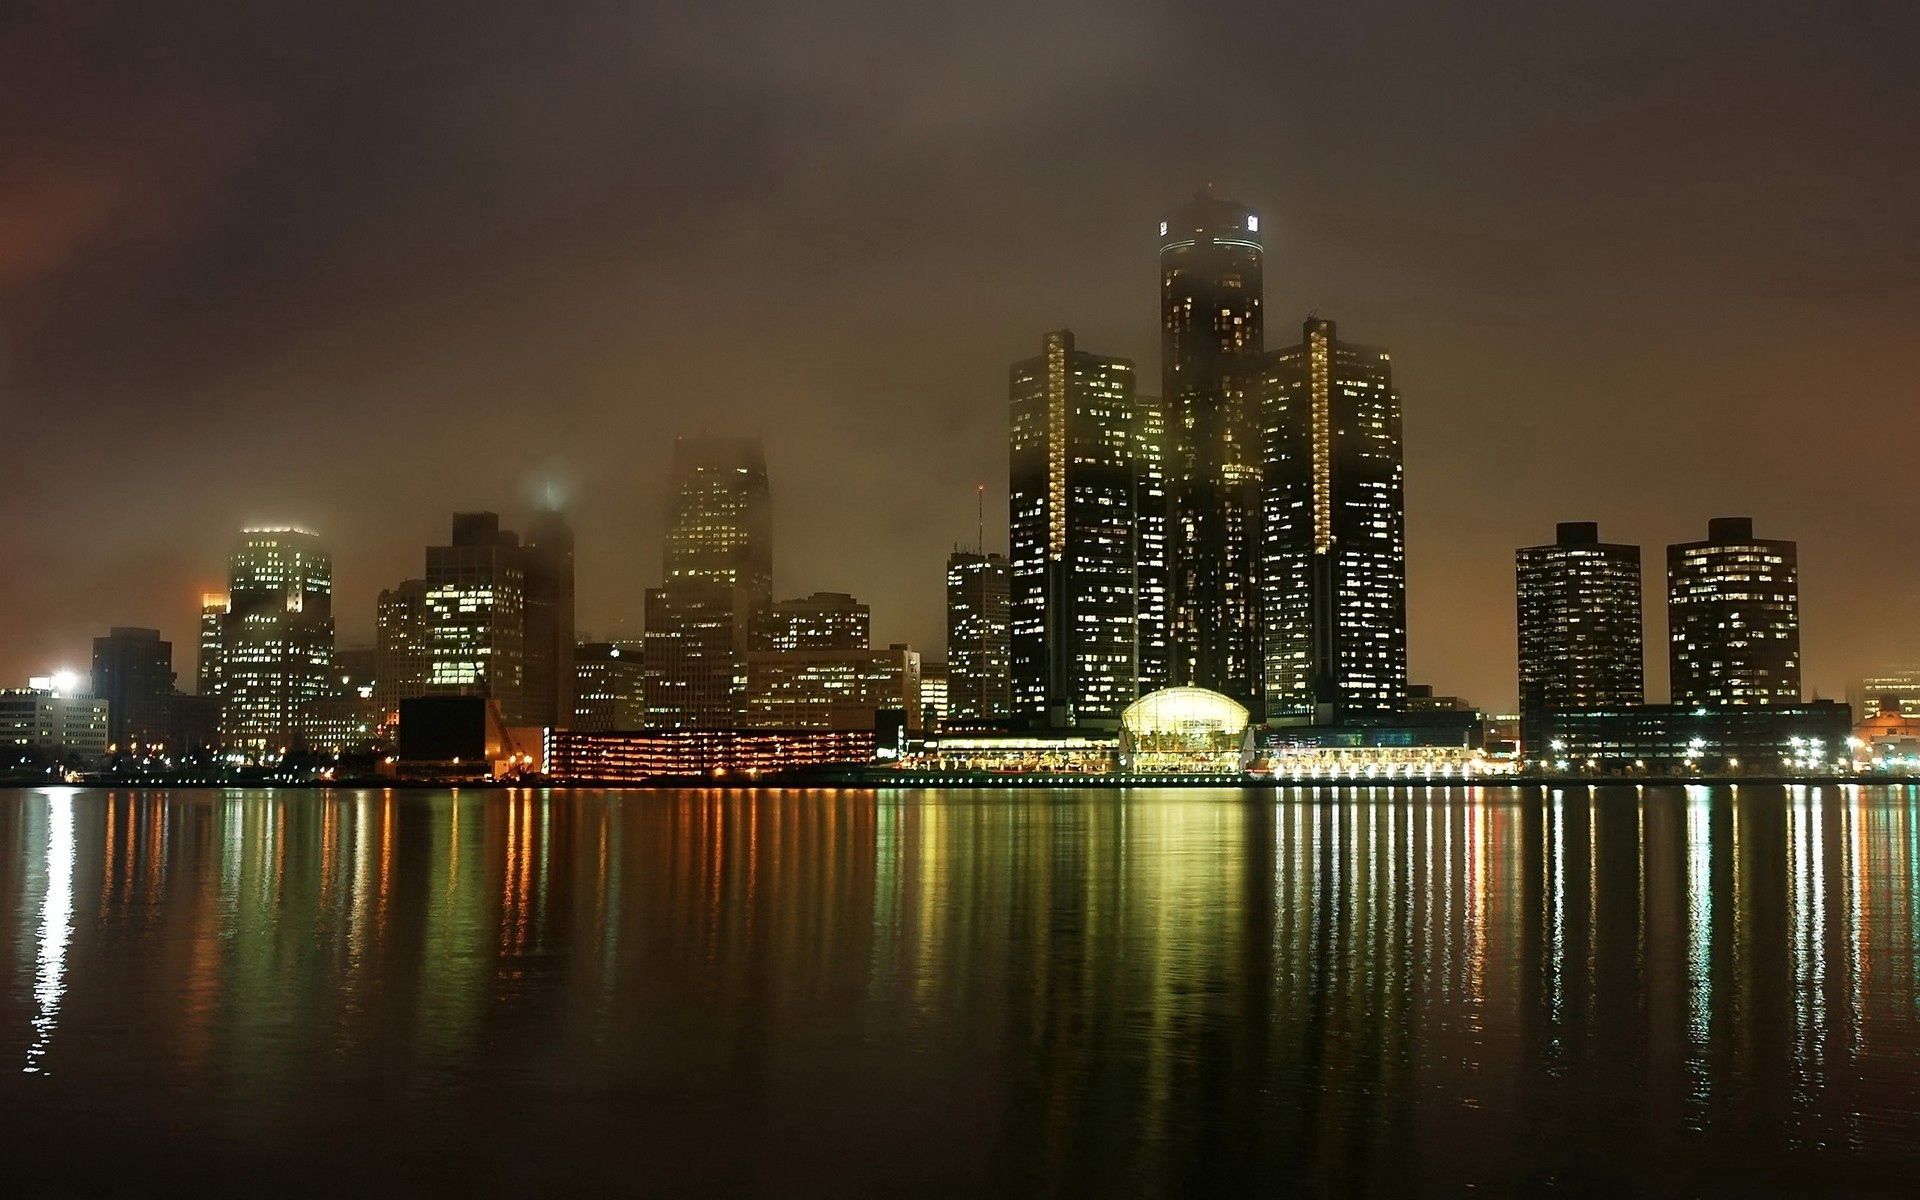 america, landscape, cities, water, houses, sea, night, usa, building, lights, reflection, fog, ocean, skyscrapers, united states, megapolis, megalopolis, view, bay, embankment, quay, michigan, detroit